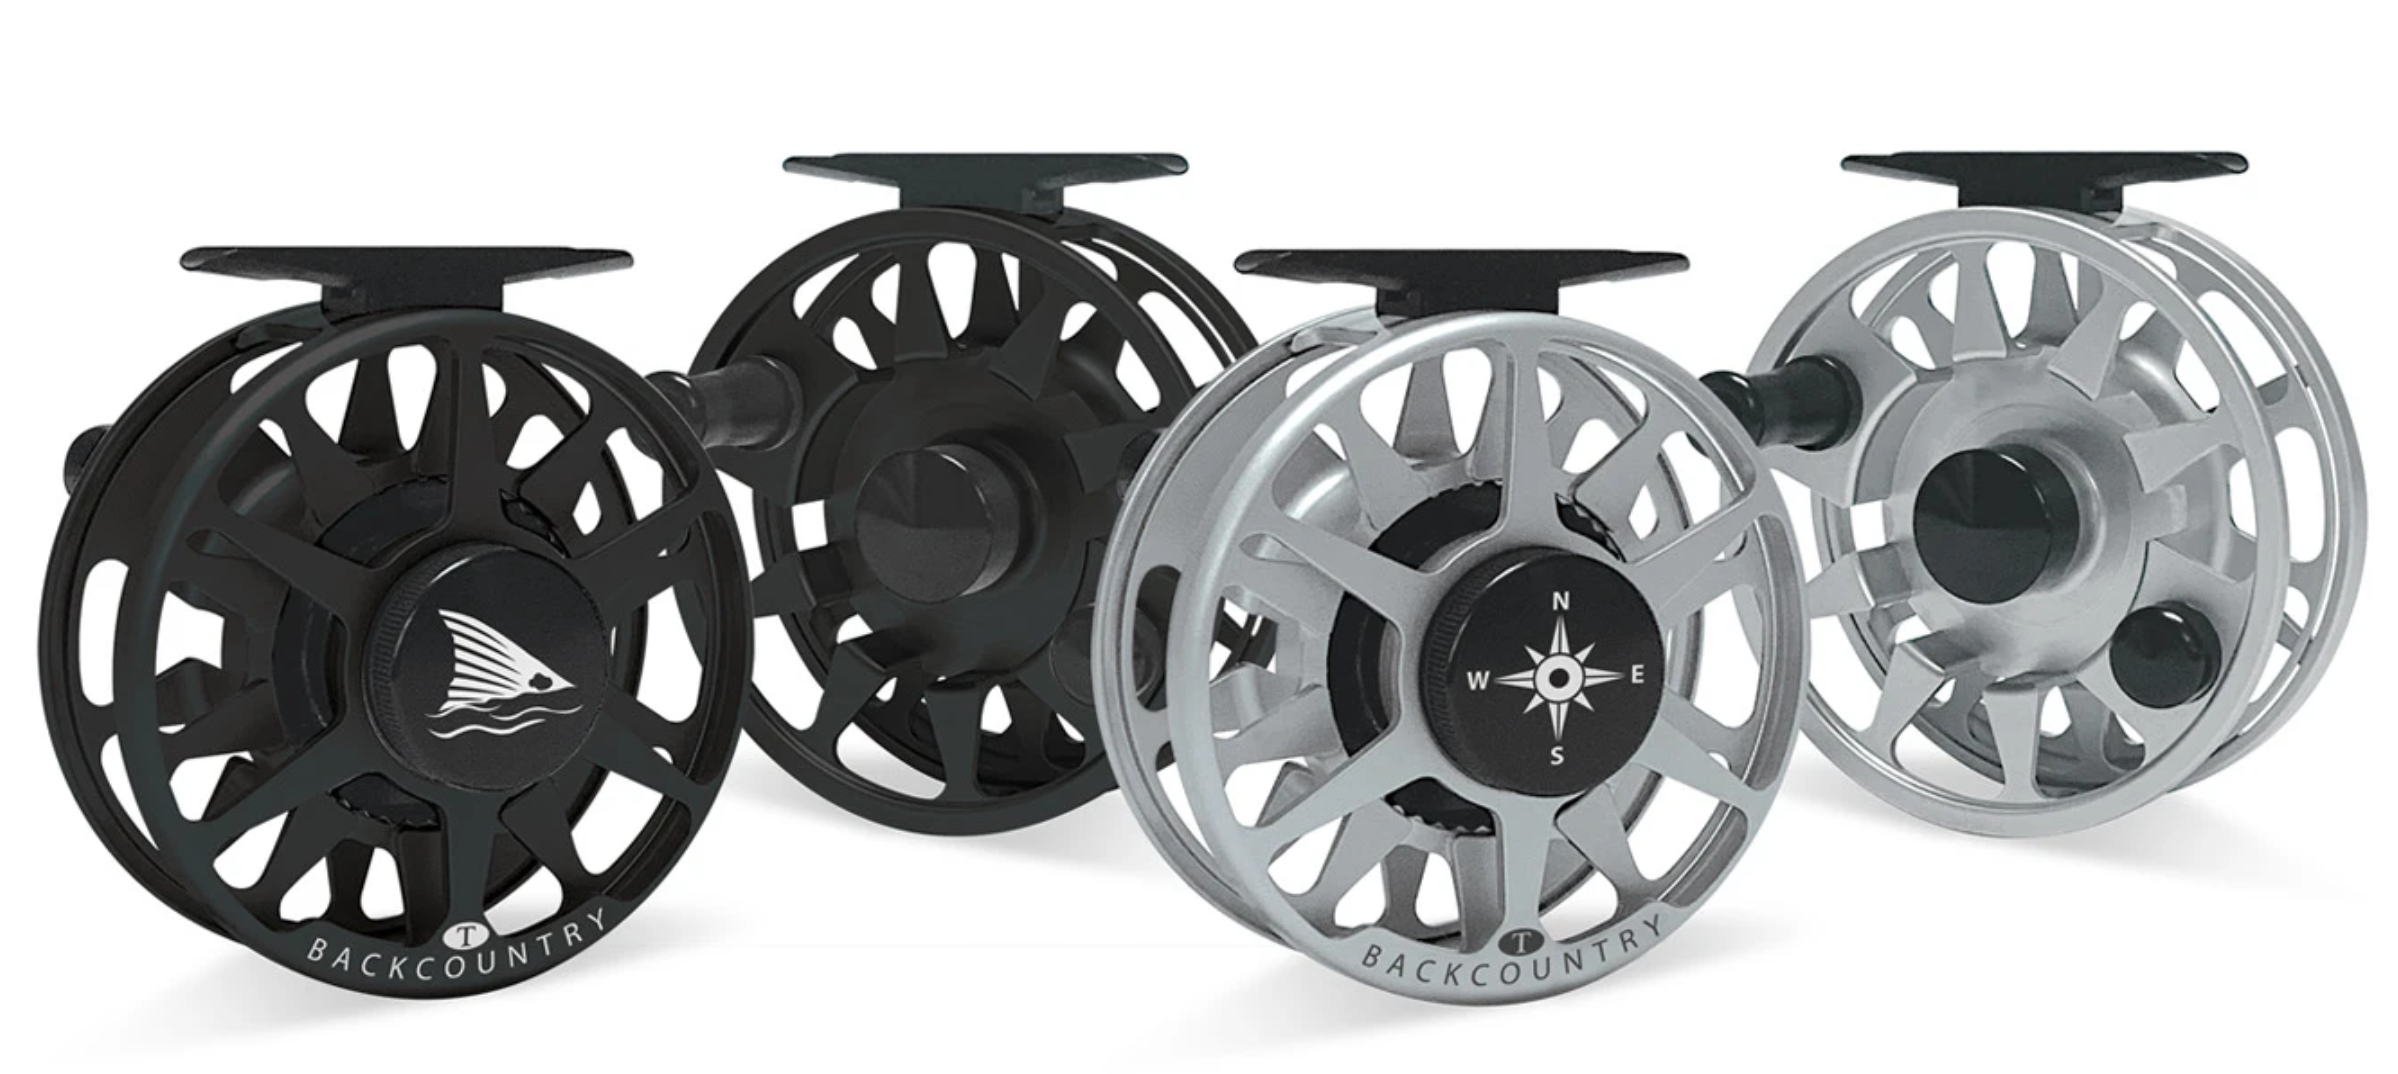 Tibor BackCountry Fly Reels (5-7wt) - NEW!